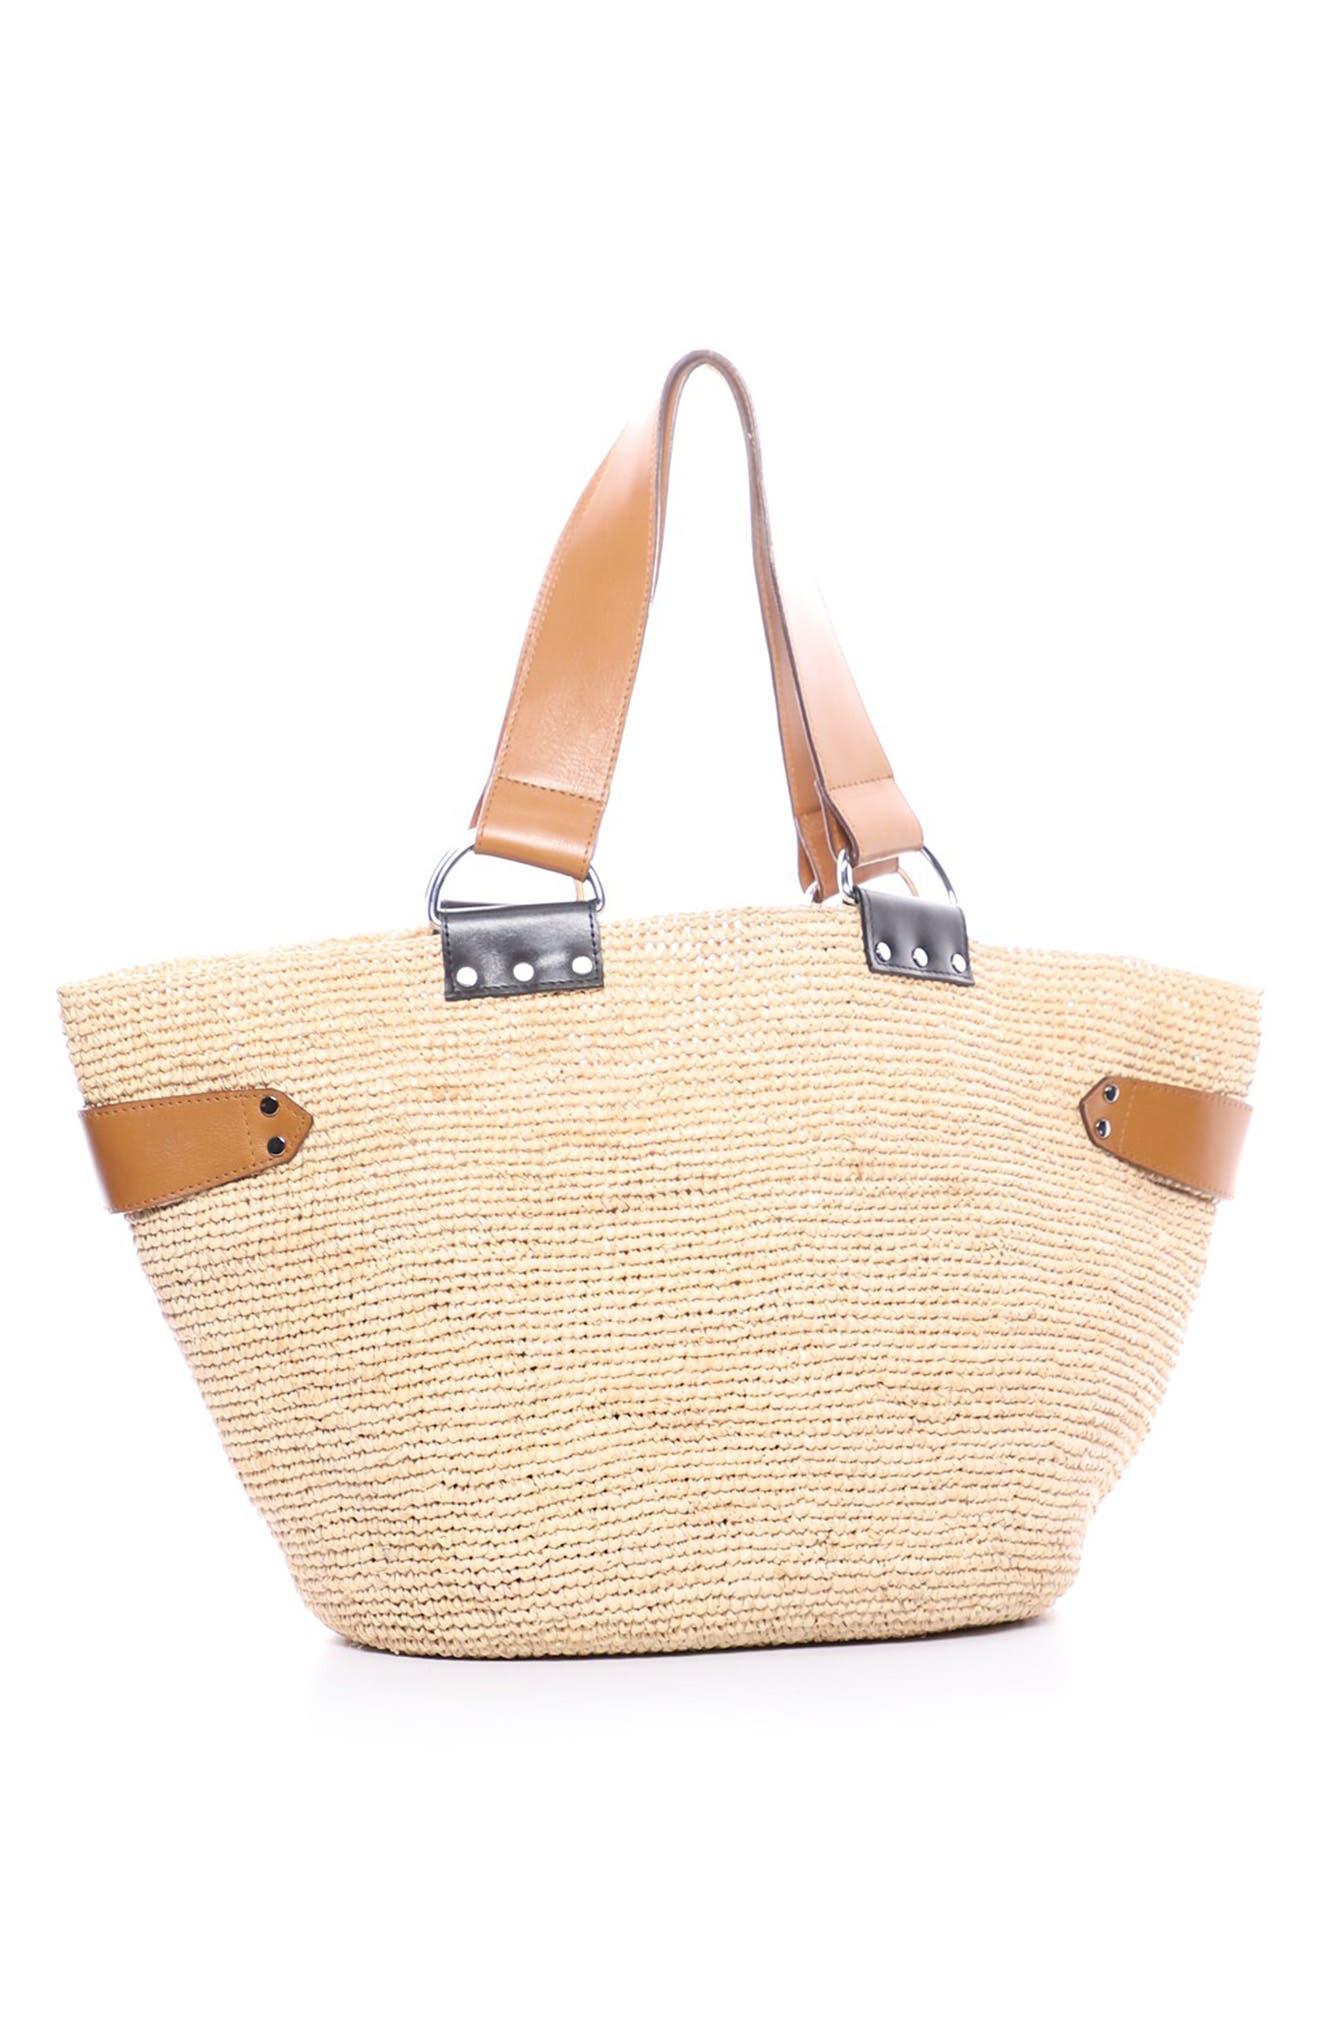 Isabel Marant Bahiba Straw Tote in Natural | Lyst